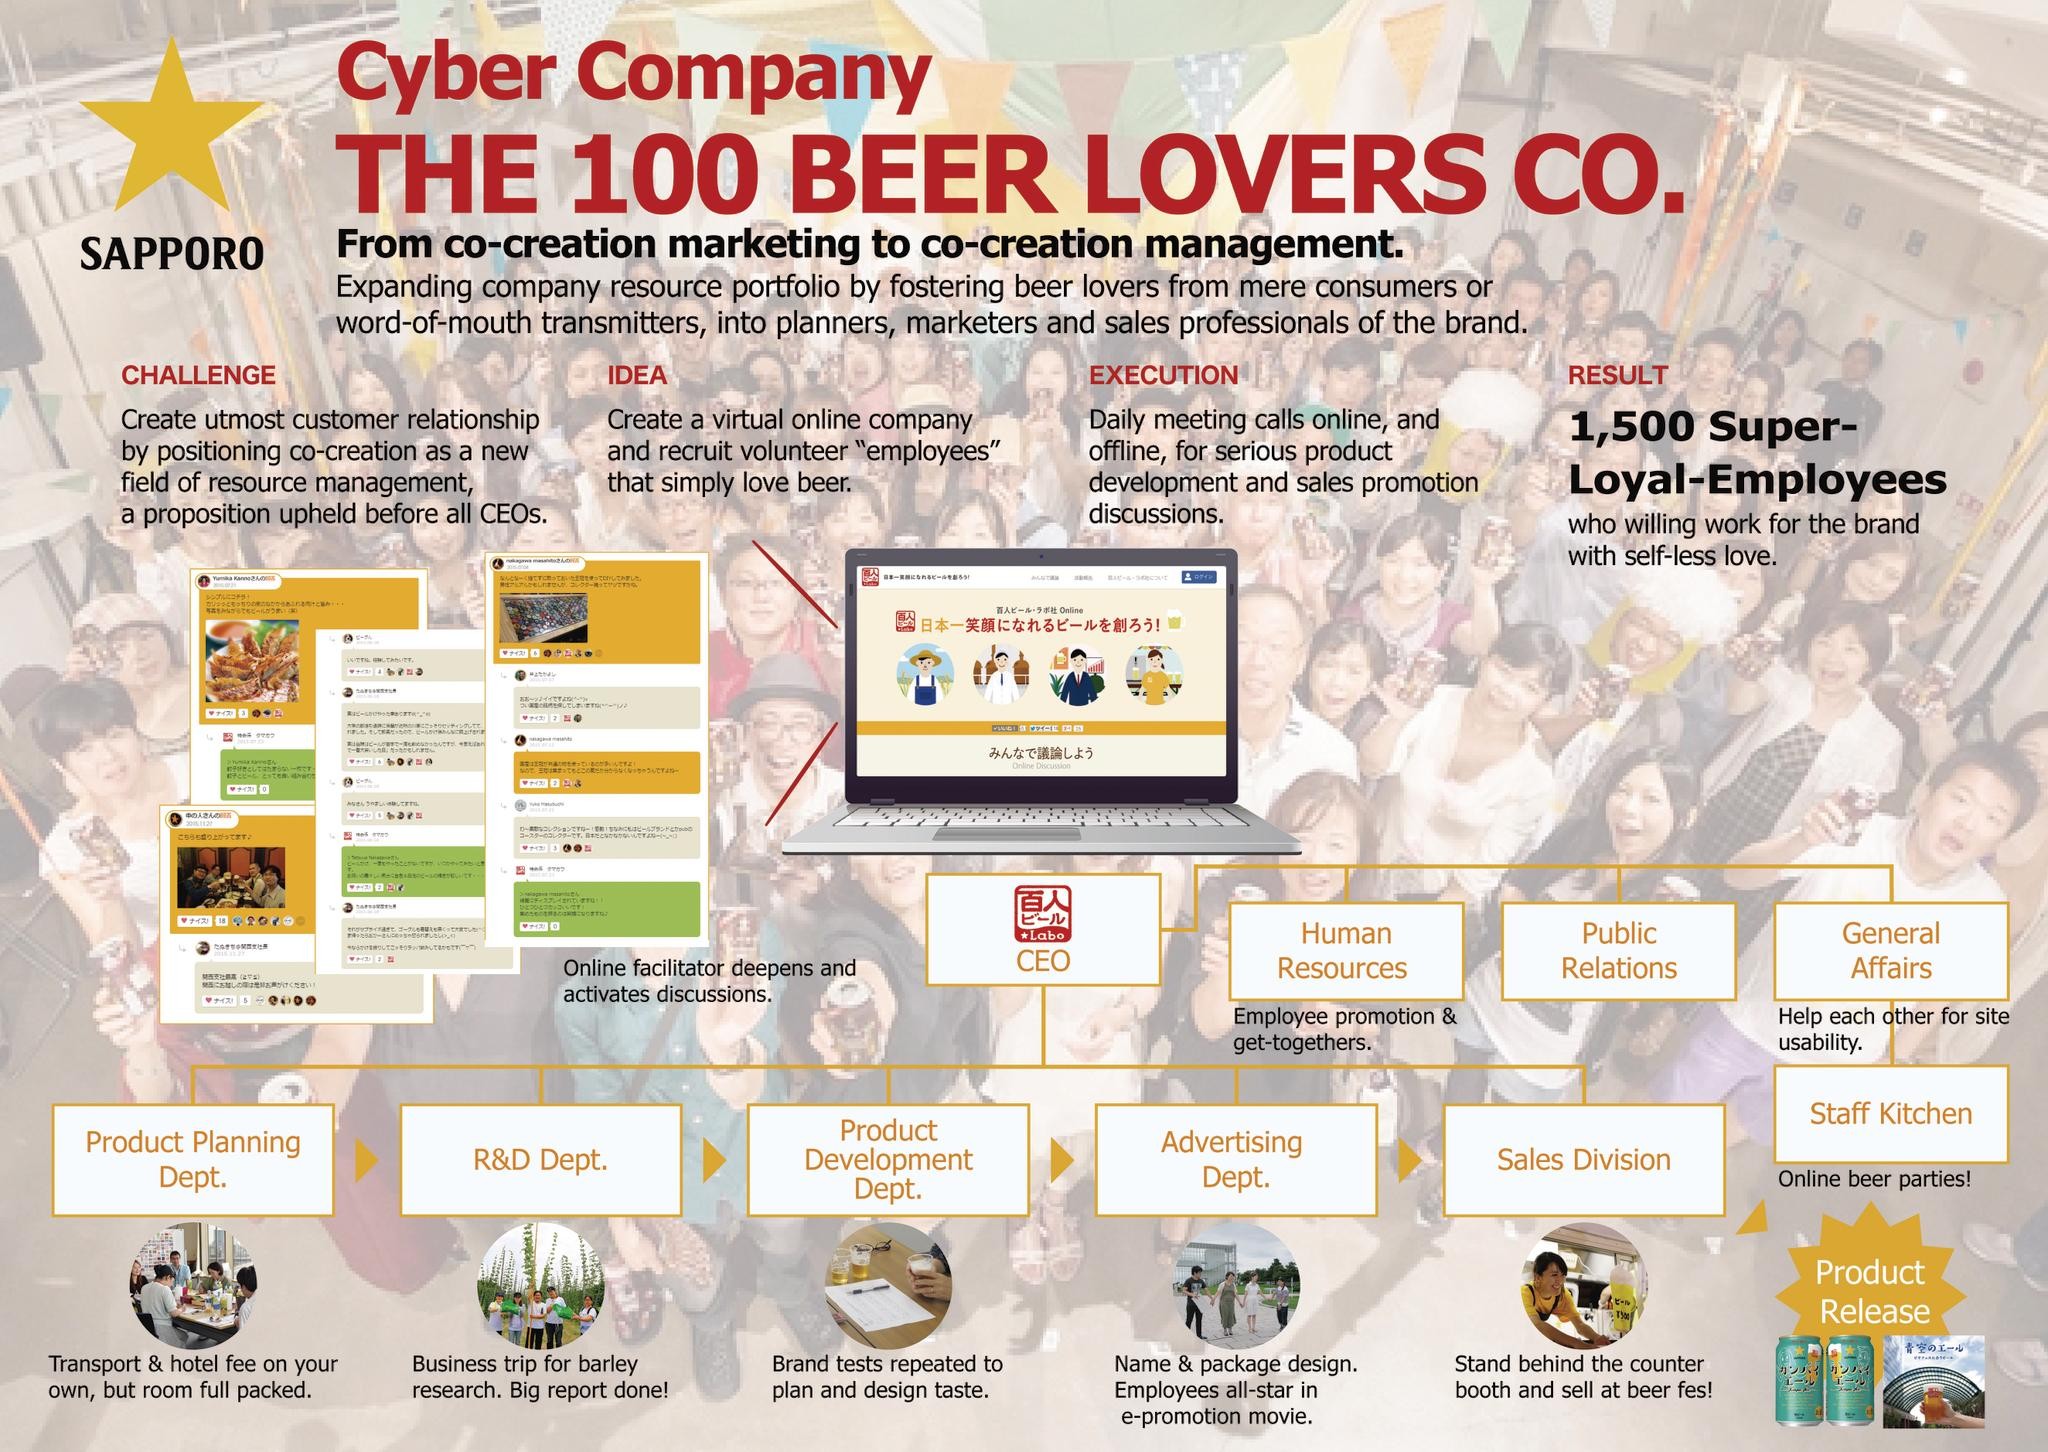 The 100 Beer Lovers Co.